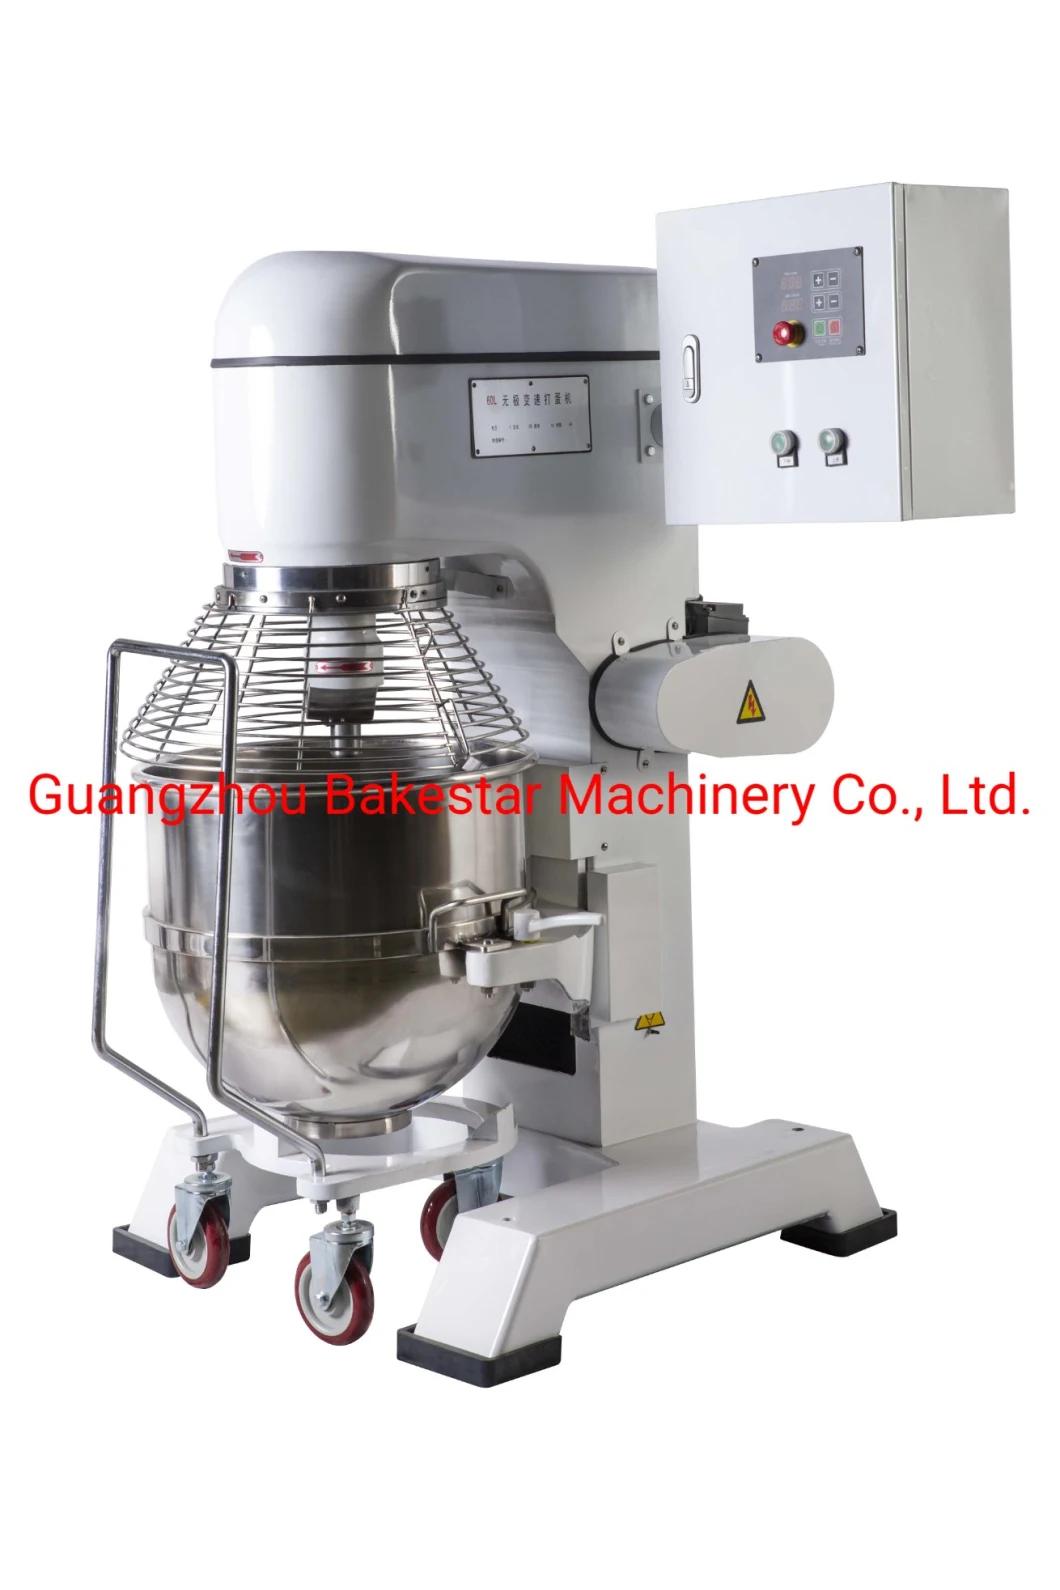 Sun Mate Commerical 3 Functions Planetary Mixer 5L to 100L Food Mixer Dough Kneader Pie Mixing Cake Mixer